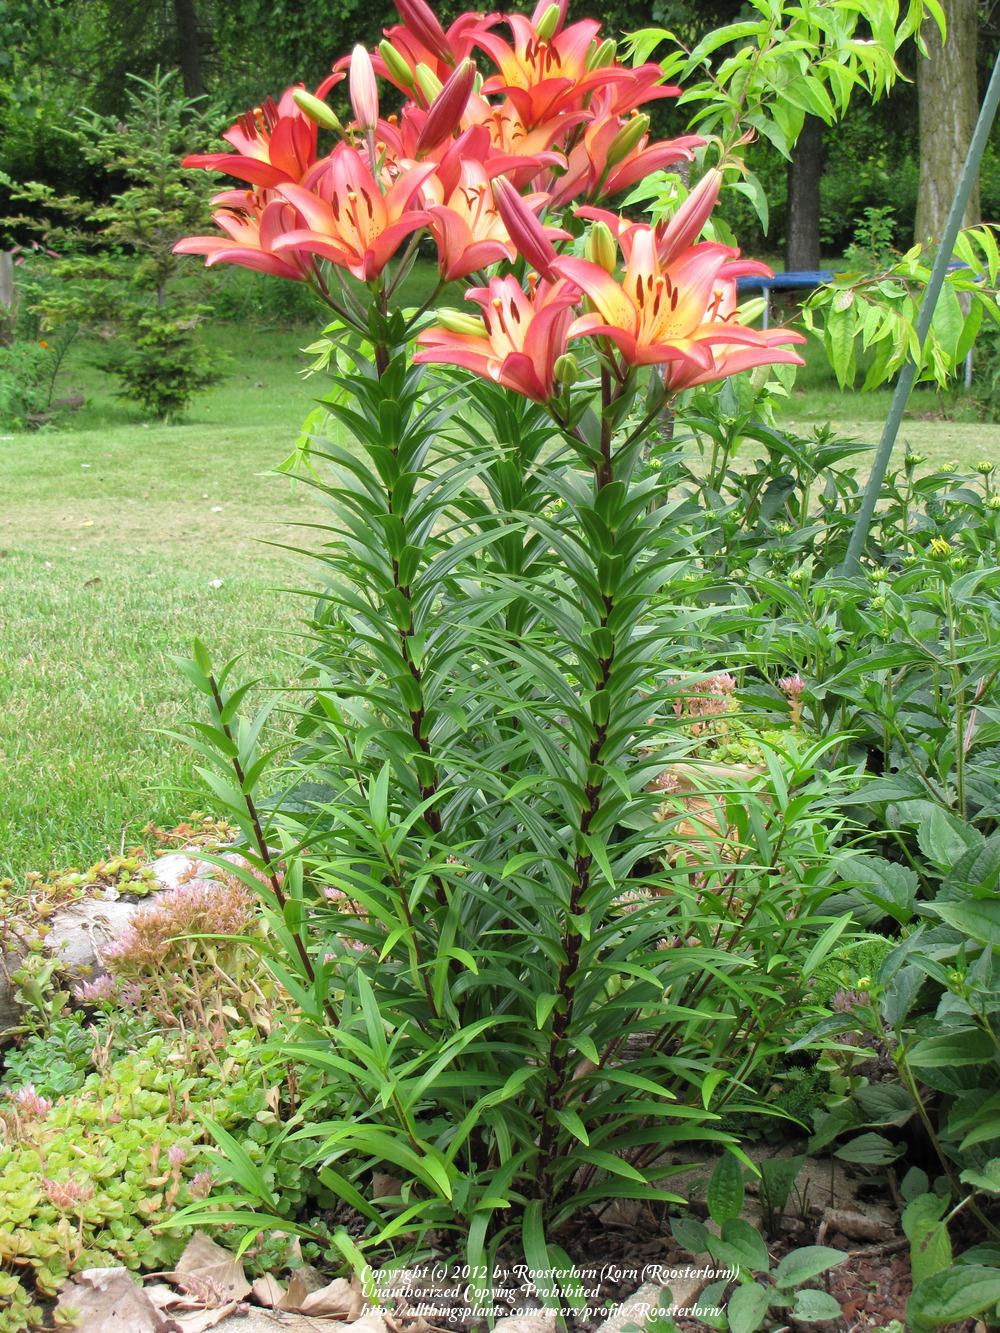 Photo of Lily (Lilium 'Royal Sunset') uploaded by Roosterlorn